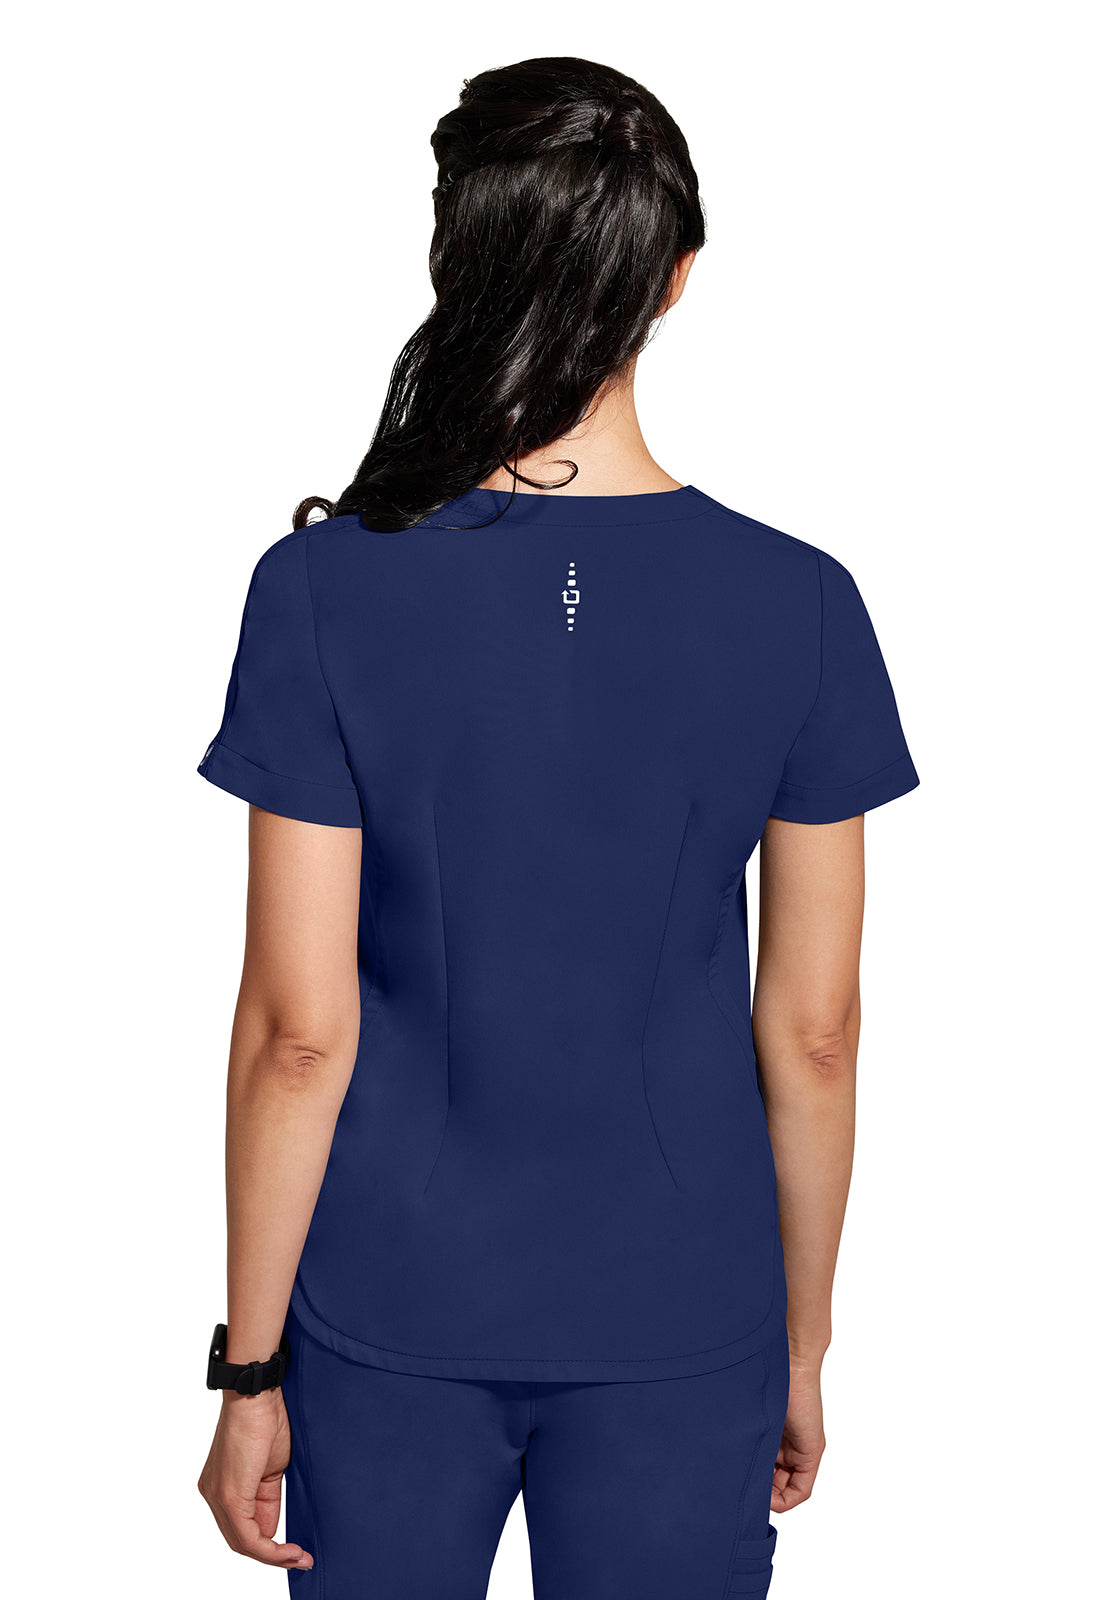 Healing Hands 360 Carly V-Neck Top Navy Back